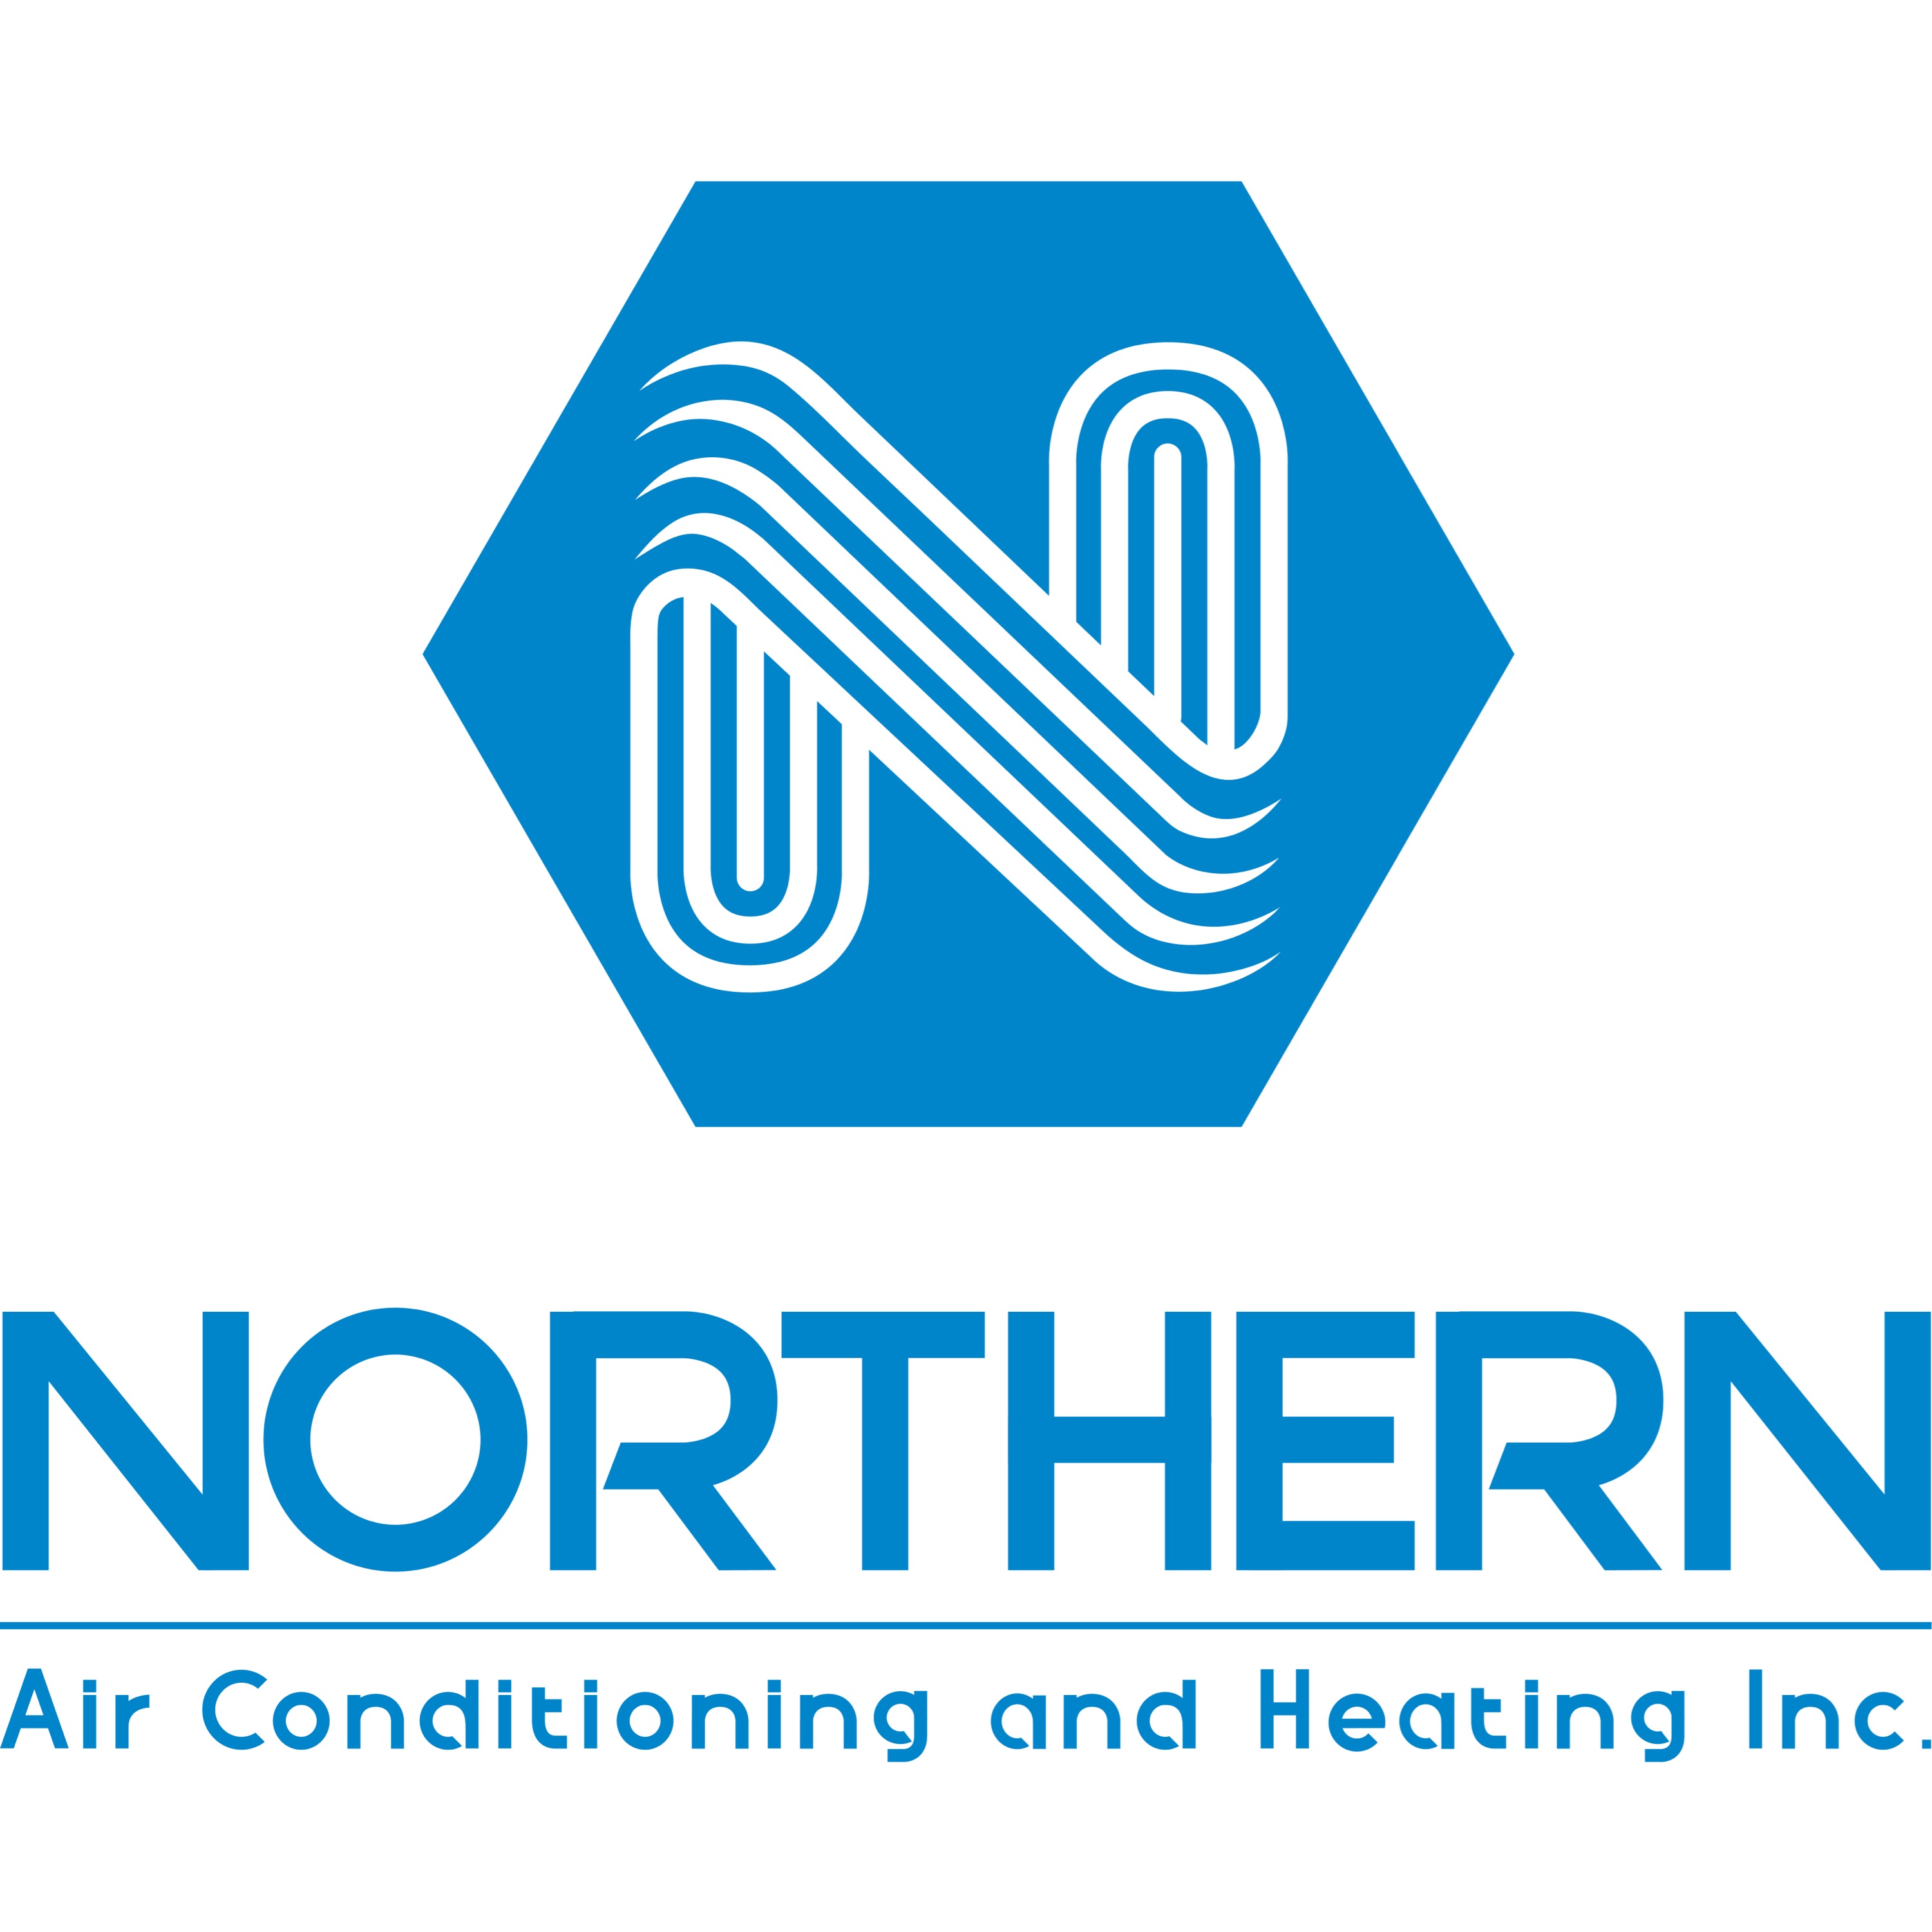 Northern Air Conditioning and Heating, Inc. Logo